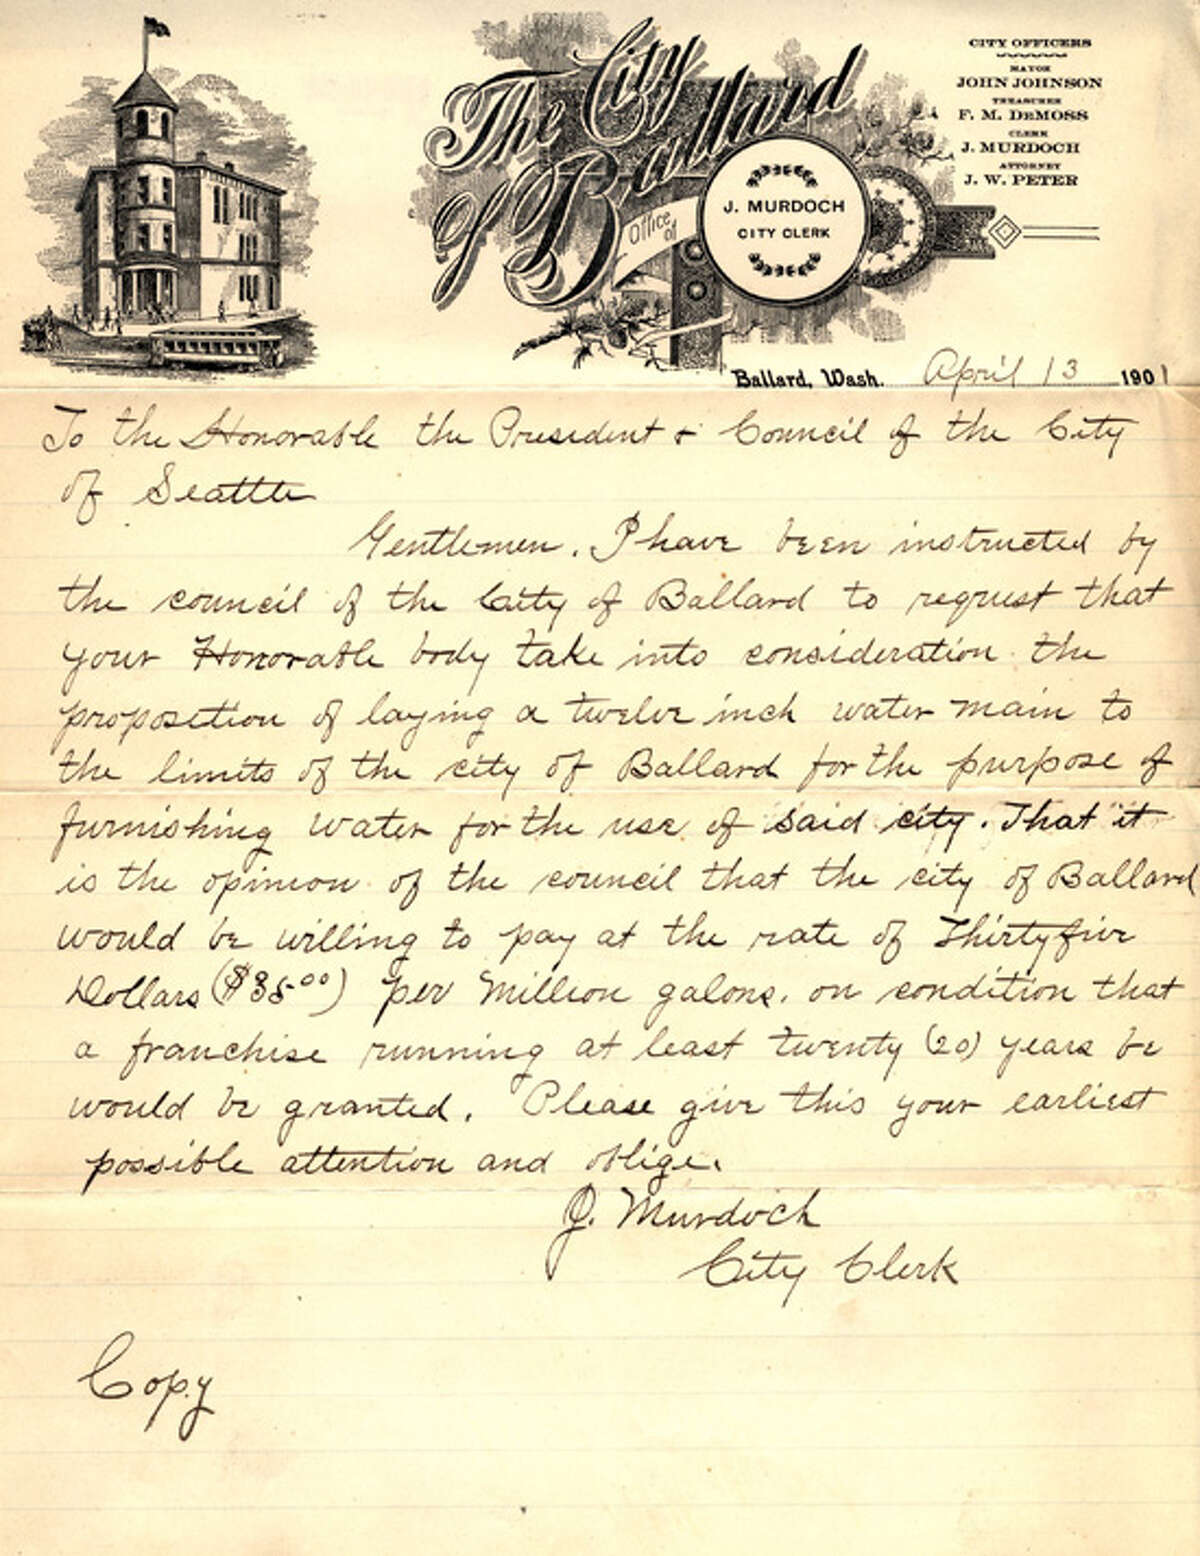 Ballard began to struggle as it grew, and water became one major hurdle. In 1901, the city sent this letter as its formal request that Seattle sell water to Ballard. The offered price was $35 per million gallons of water for 20 years. Box 1, Folder 35, City of Ballard City Clerk's Files (Record Series 9106-03), Seattle Municipal Archives